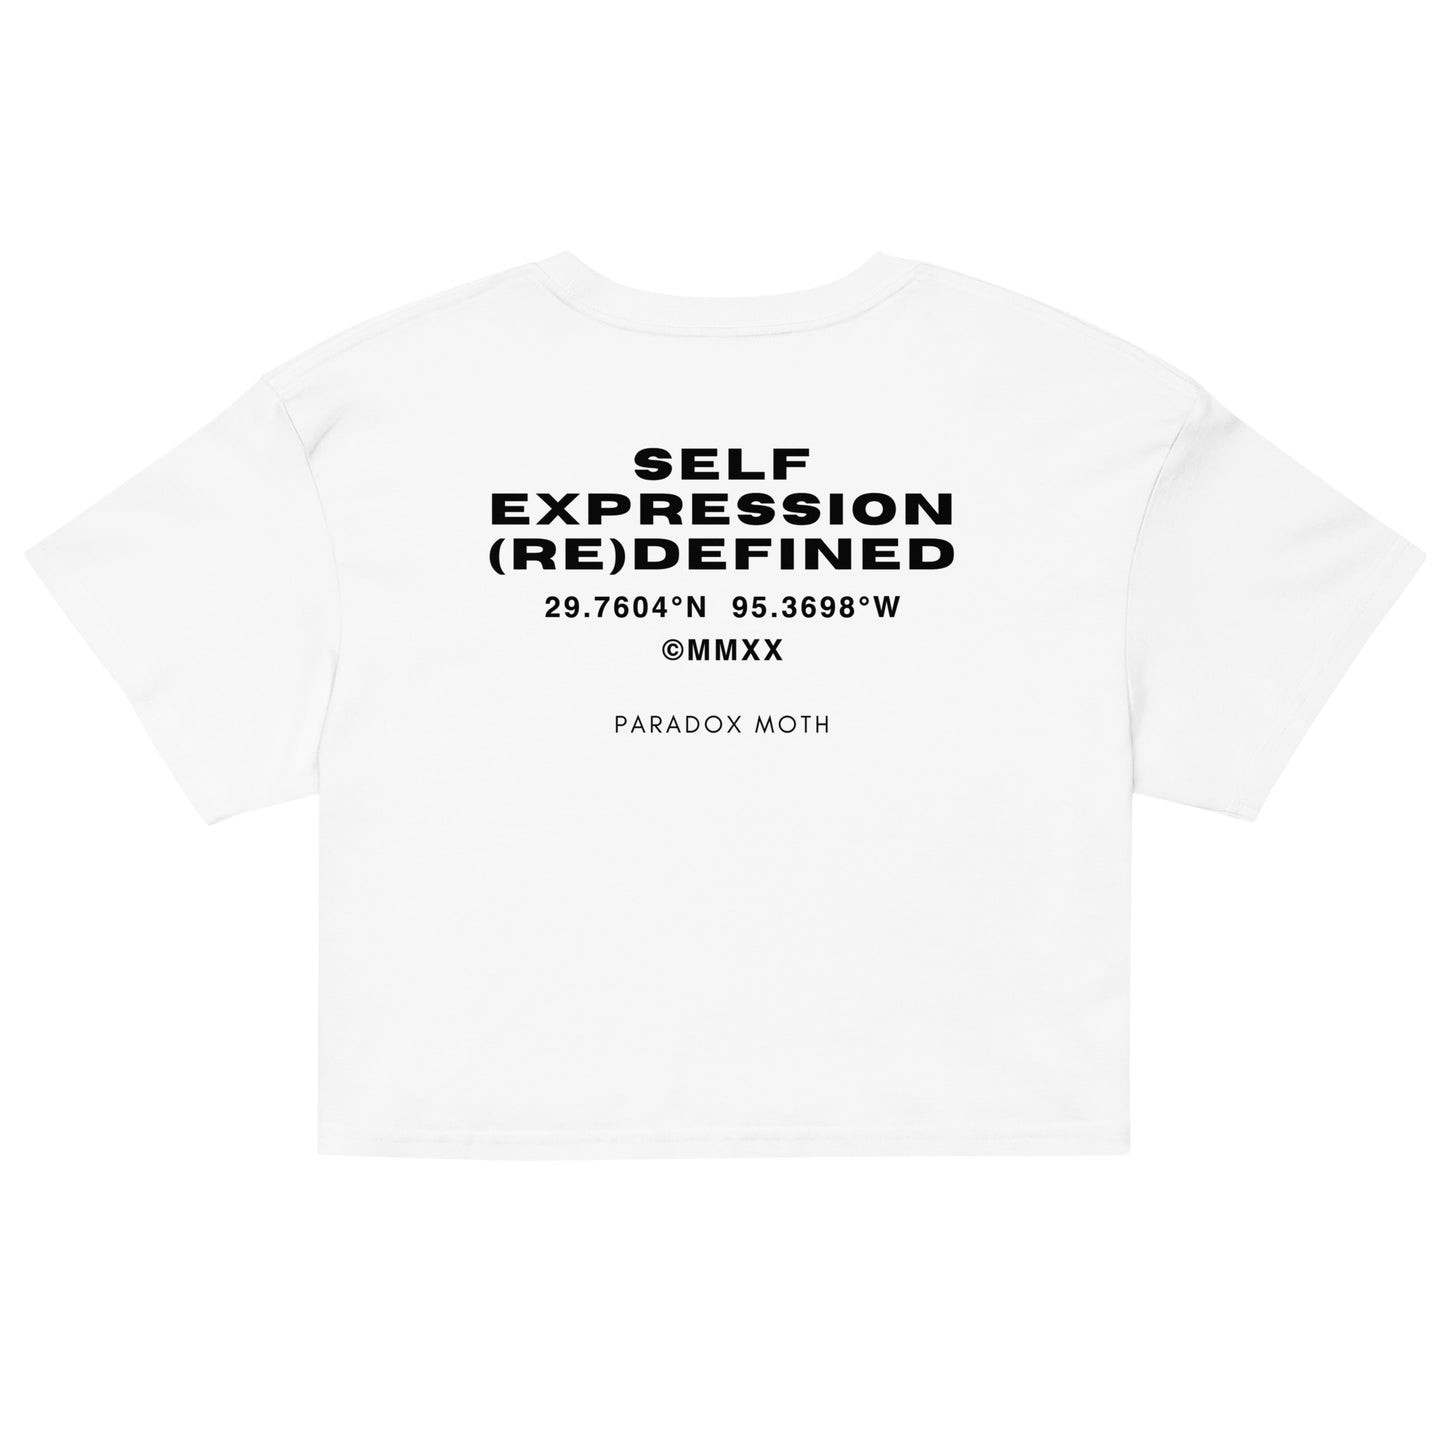 Anxiety Crop Top